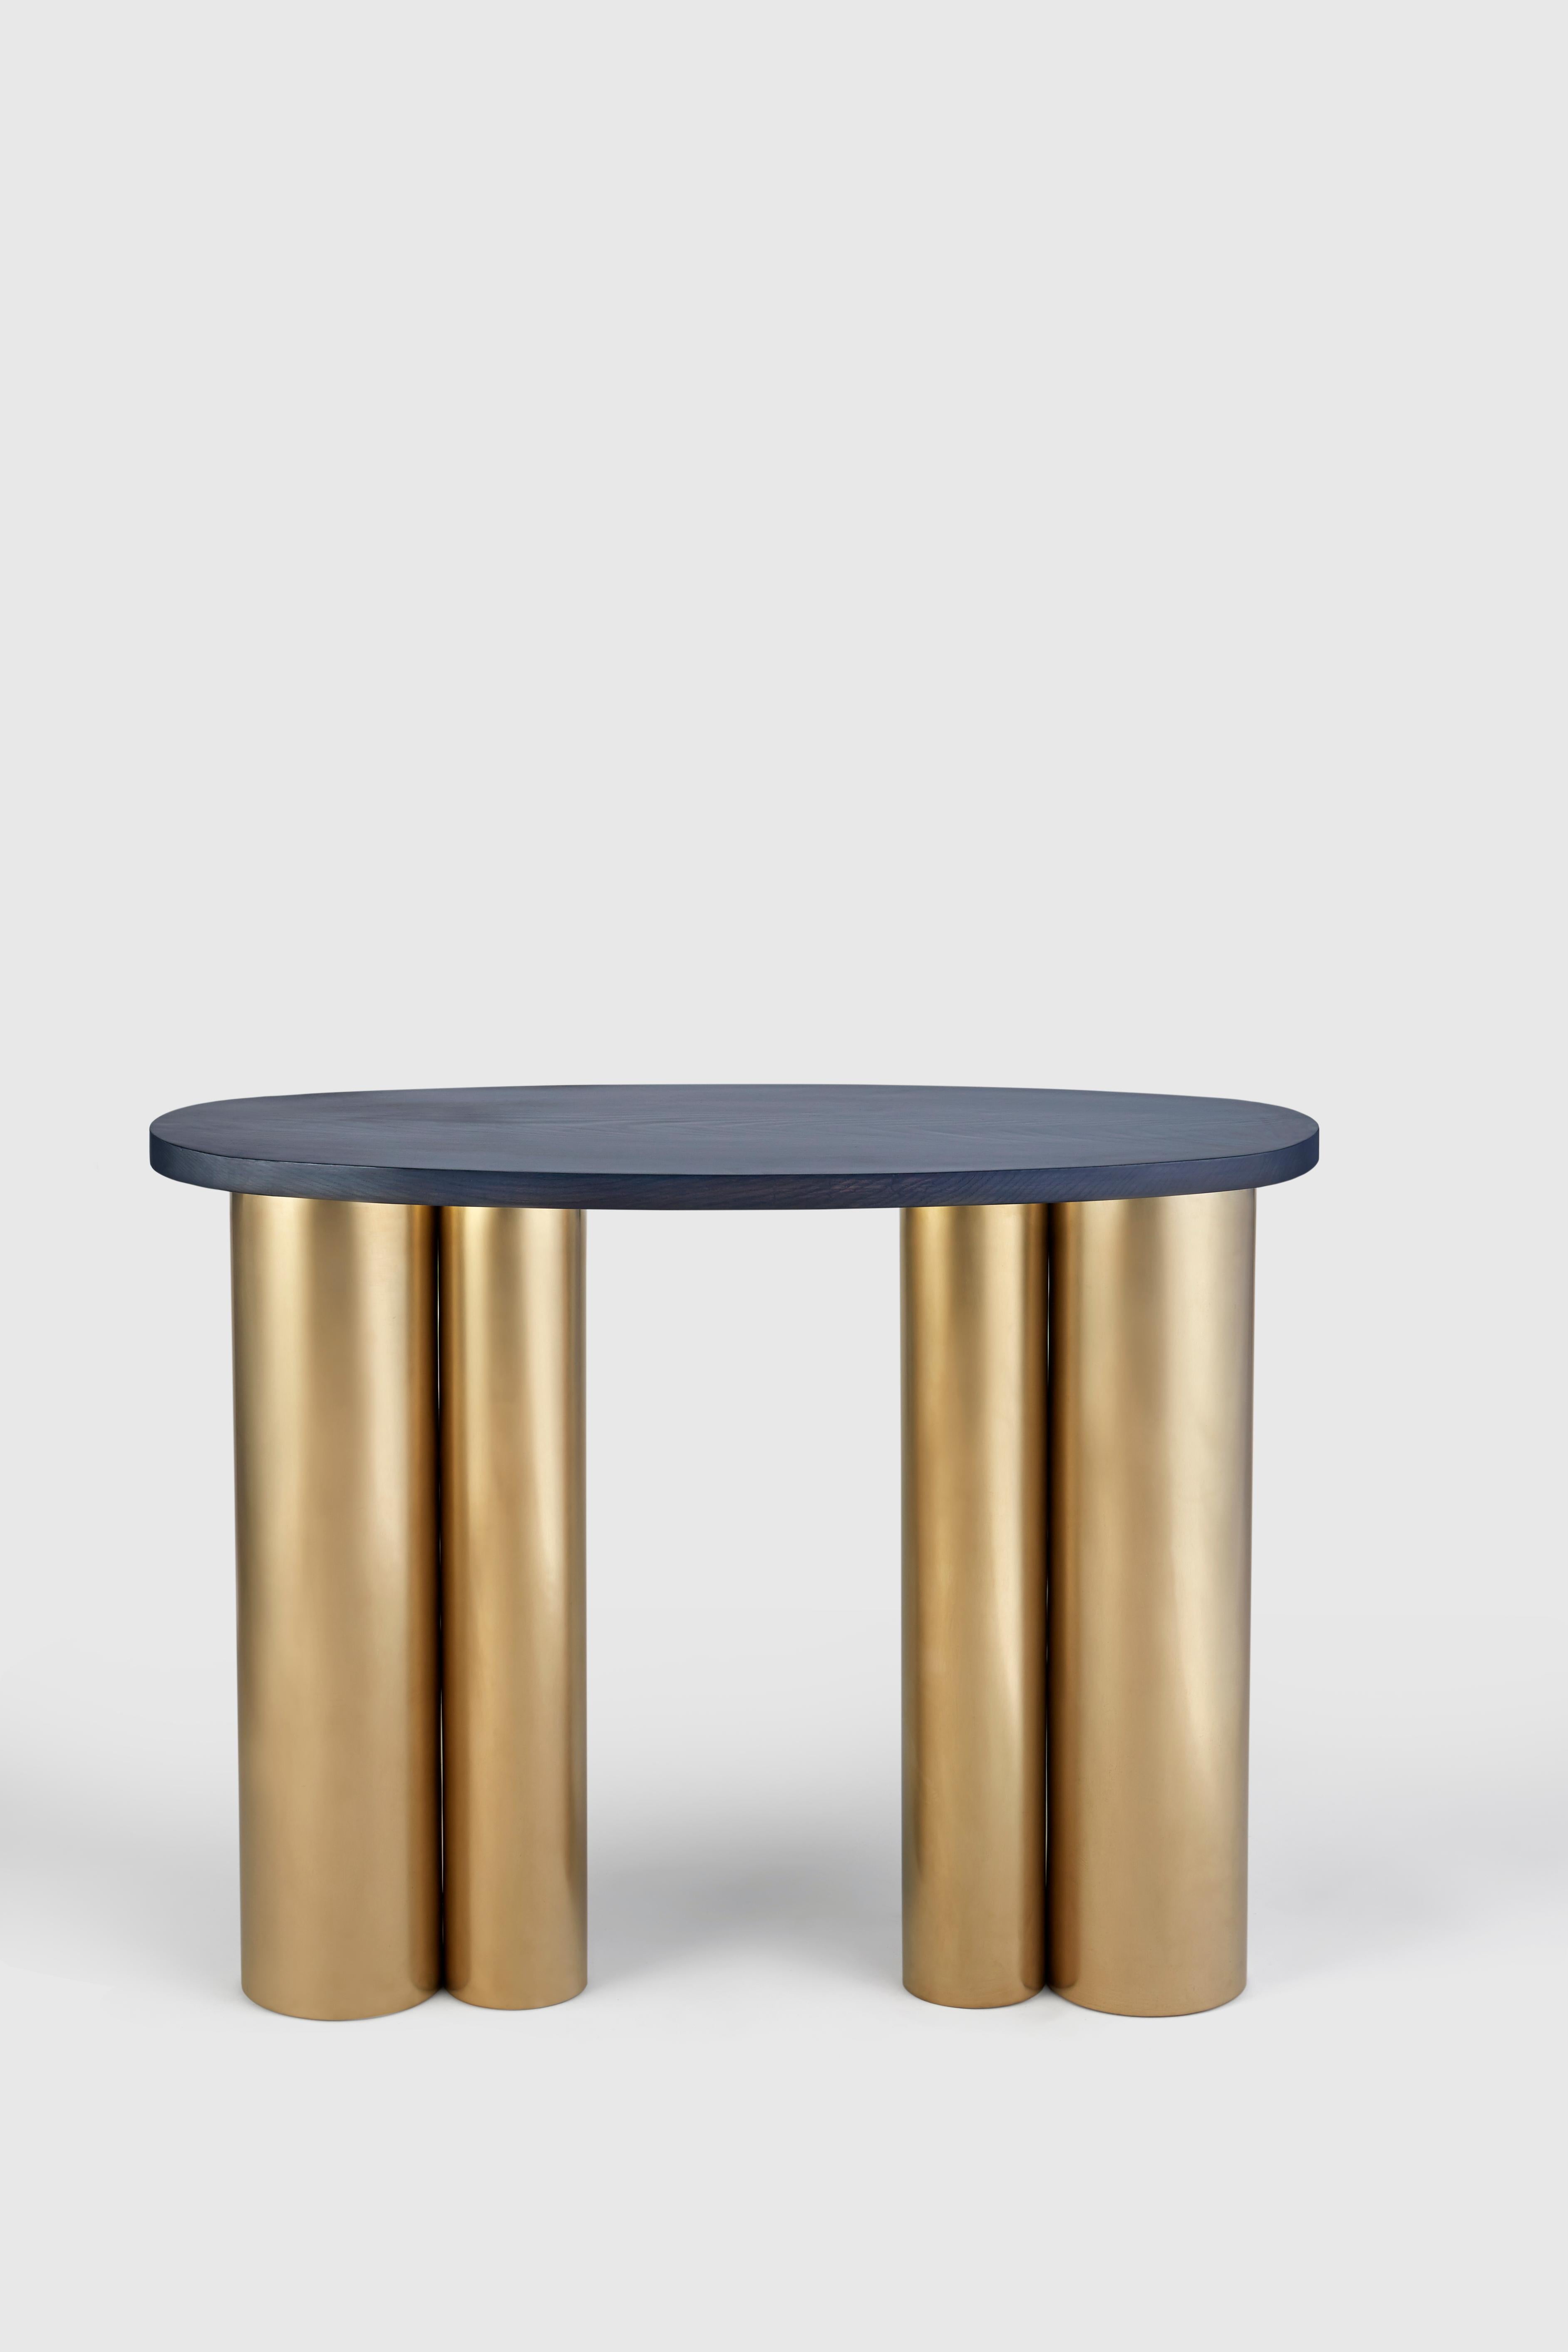 Modern Unique Bloom Table Gold by Hatsu For Sale